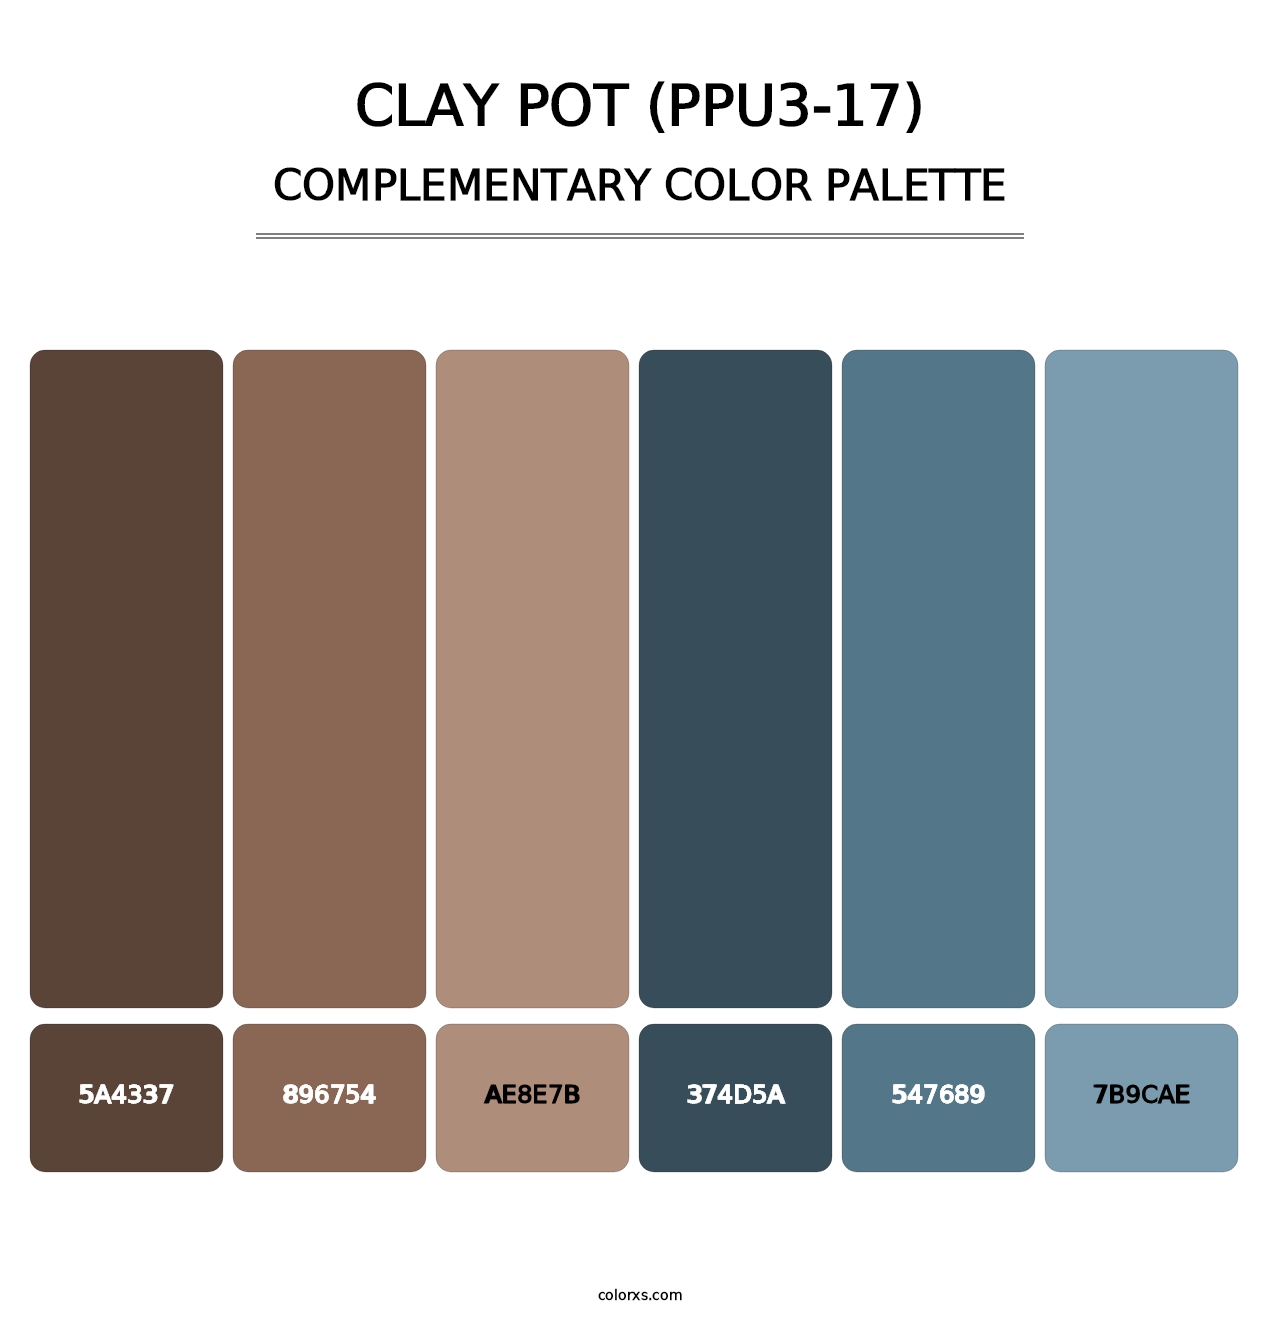 Clay Pot (PPU3-17) - Complementary Color Palette